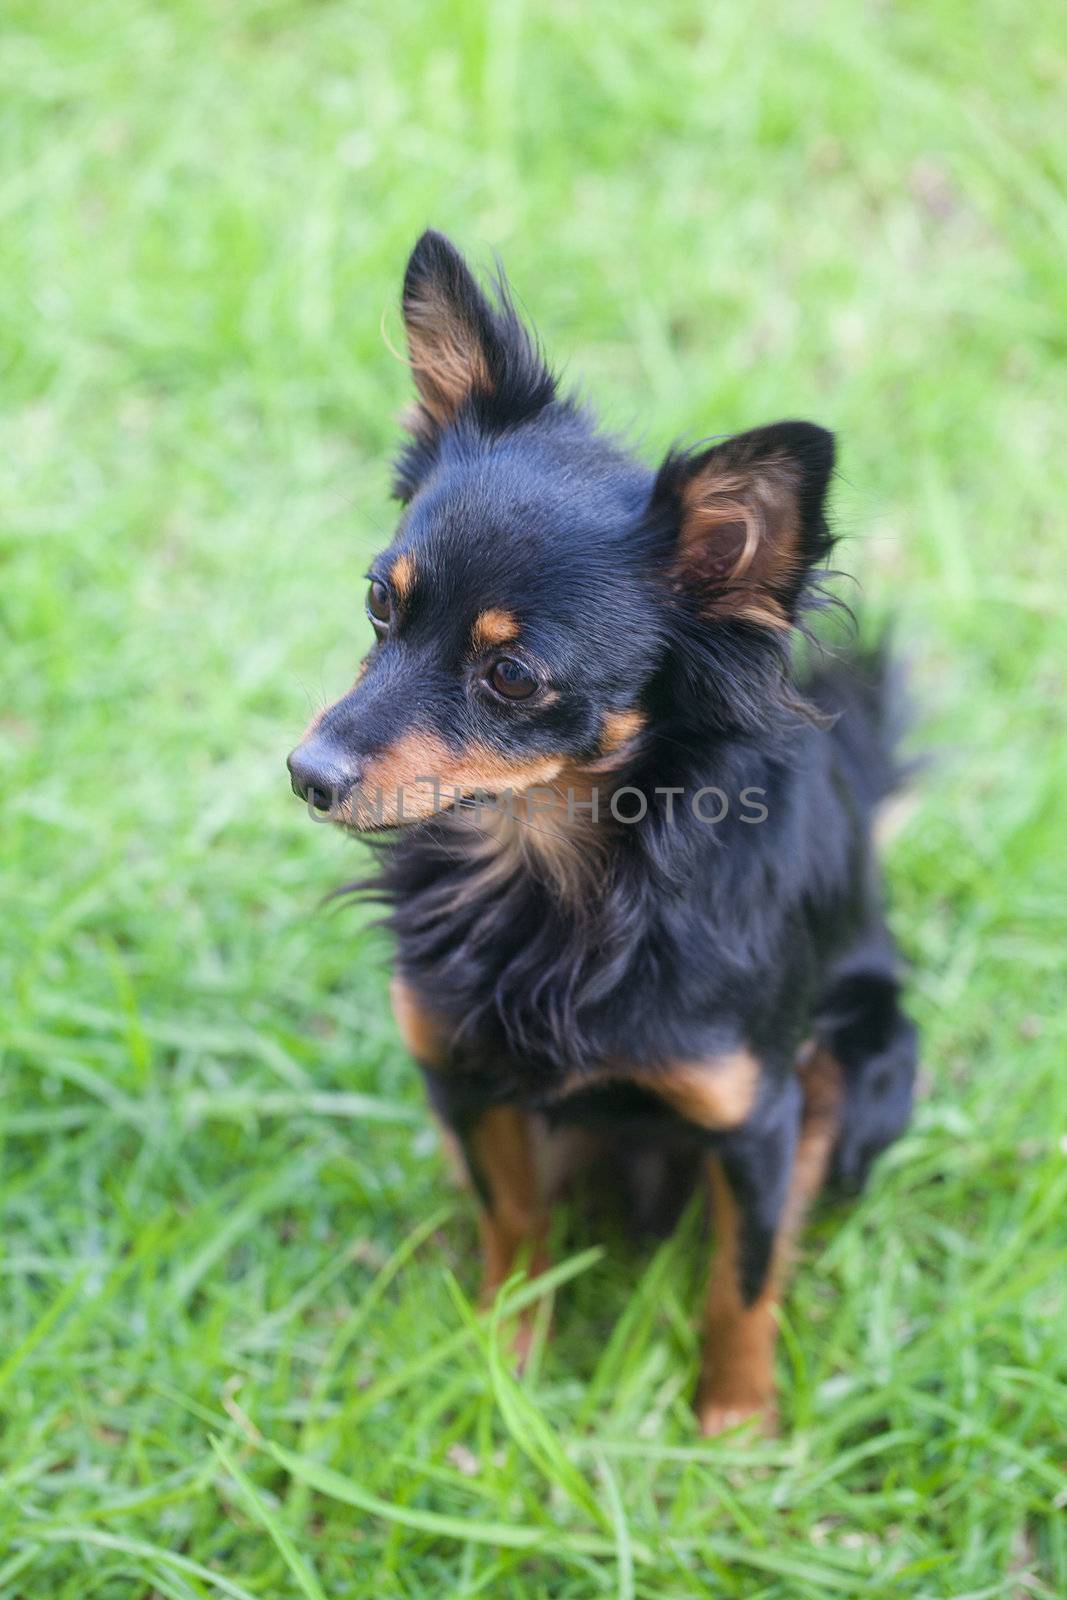 portrait of black russian toy terrier isolated on white by jannyjus